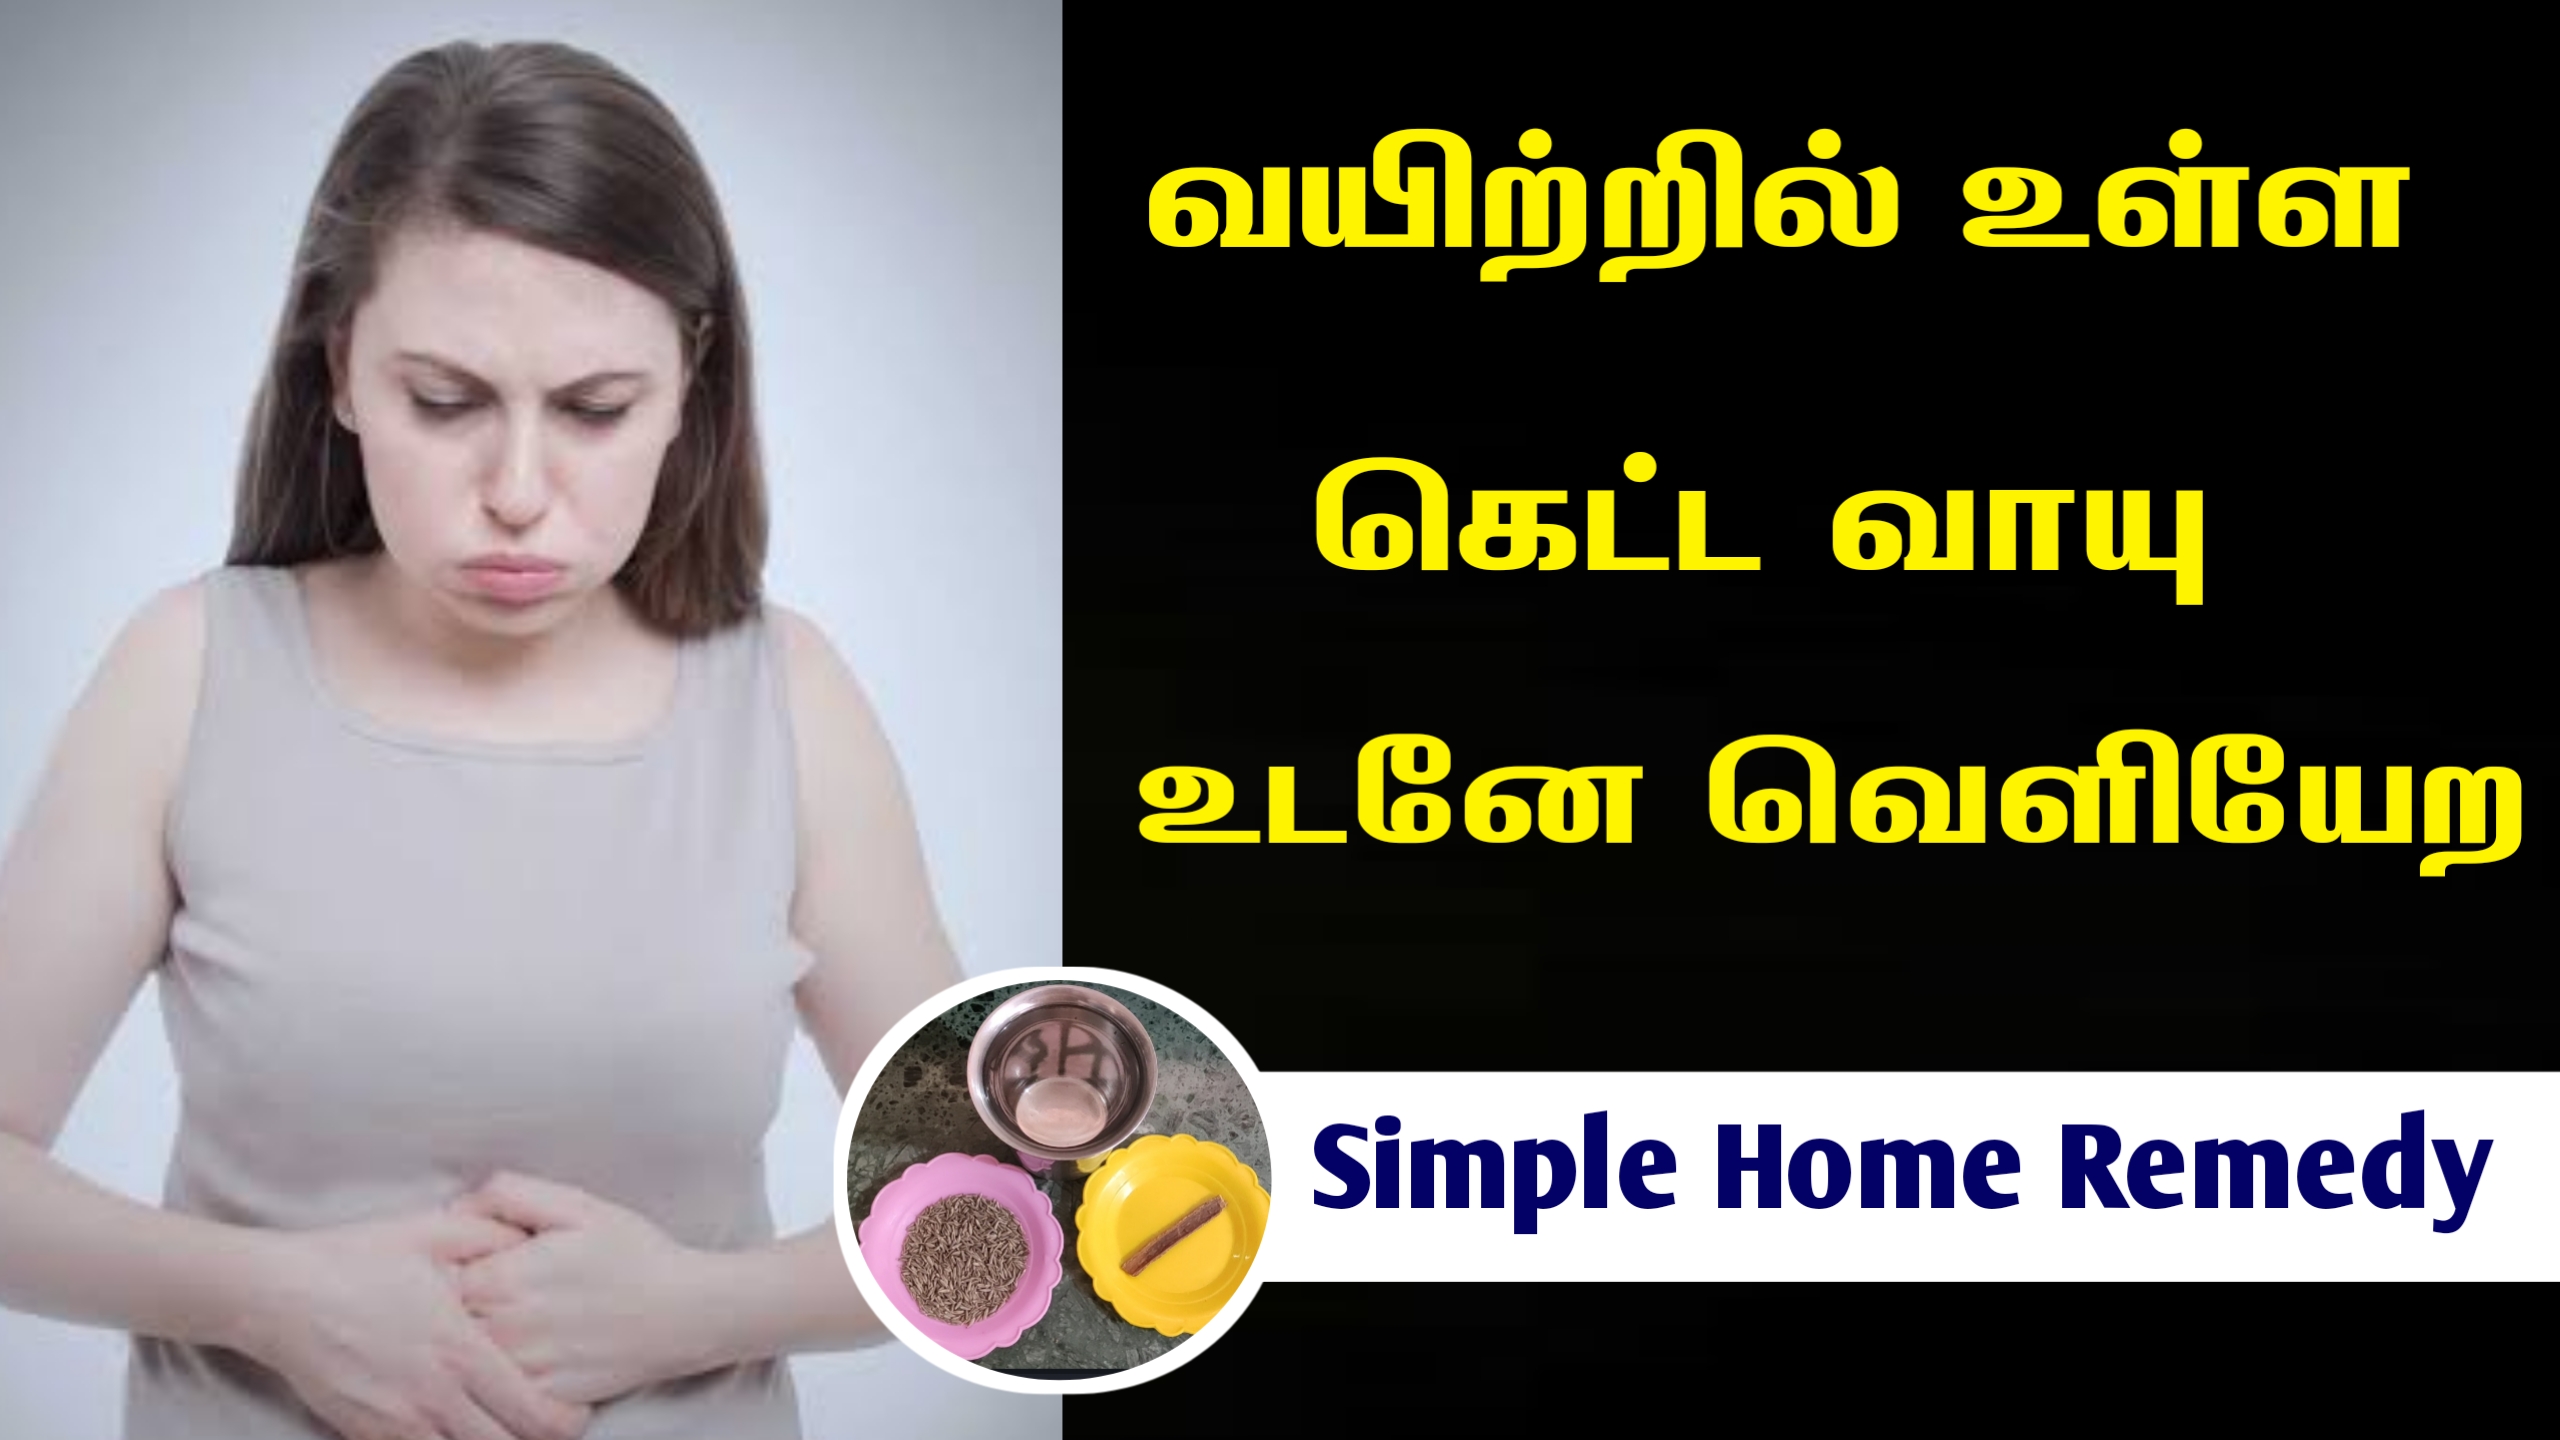 How can I remove the gastric problem at home? | Instant Relief for gas problems | Gastric Solution